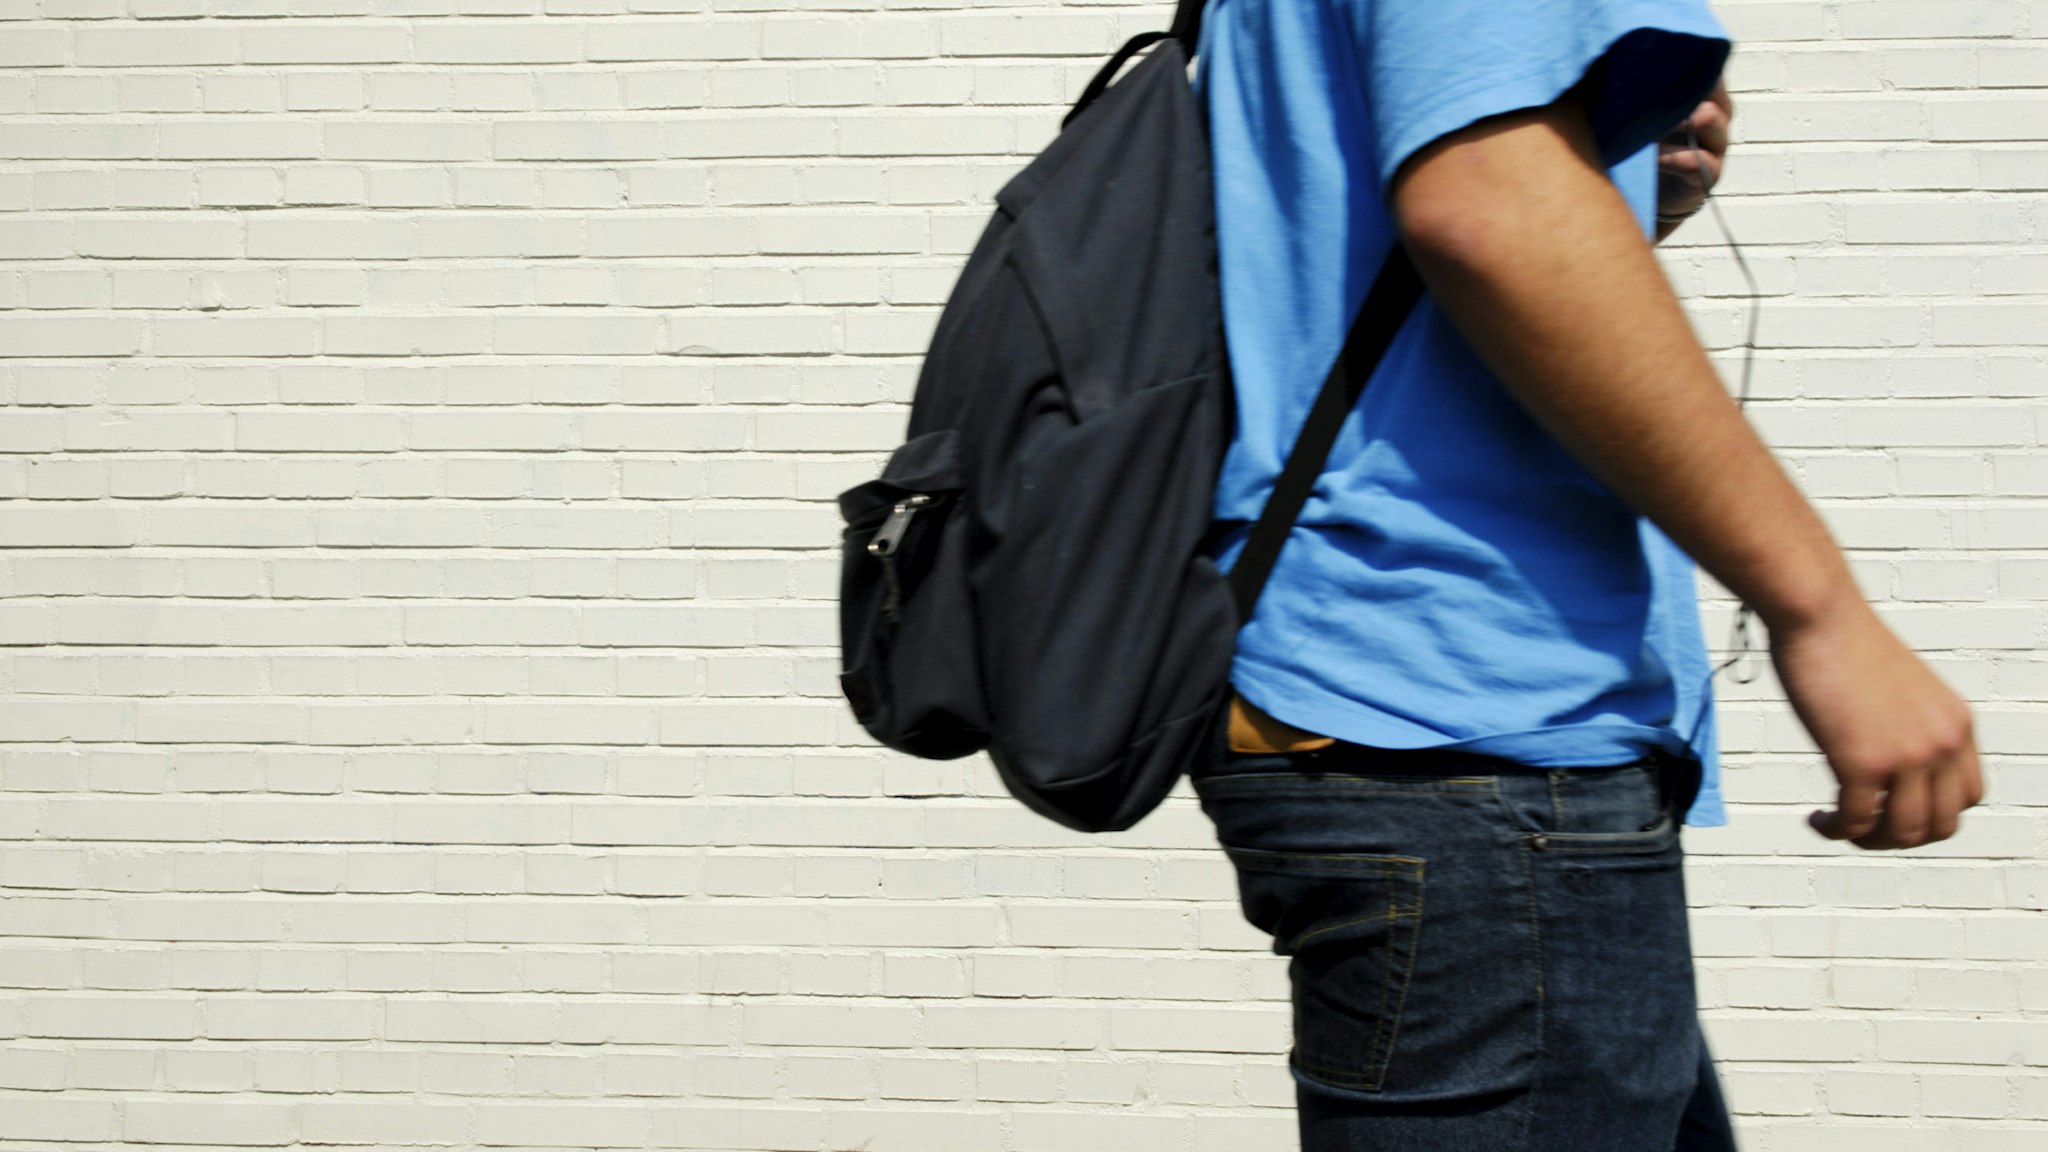 Young male student (with a black backpack, wearing a blue T-shirt and jeans) on his way to school passing an off-white brick wall. Focus is on the wall.